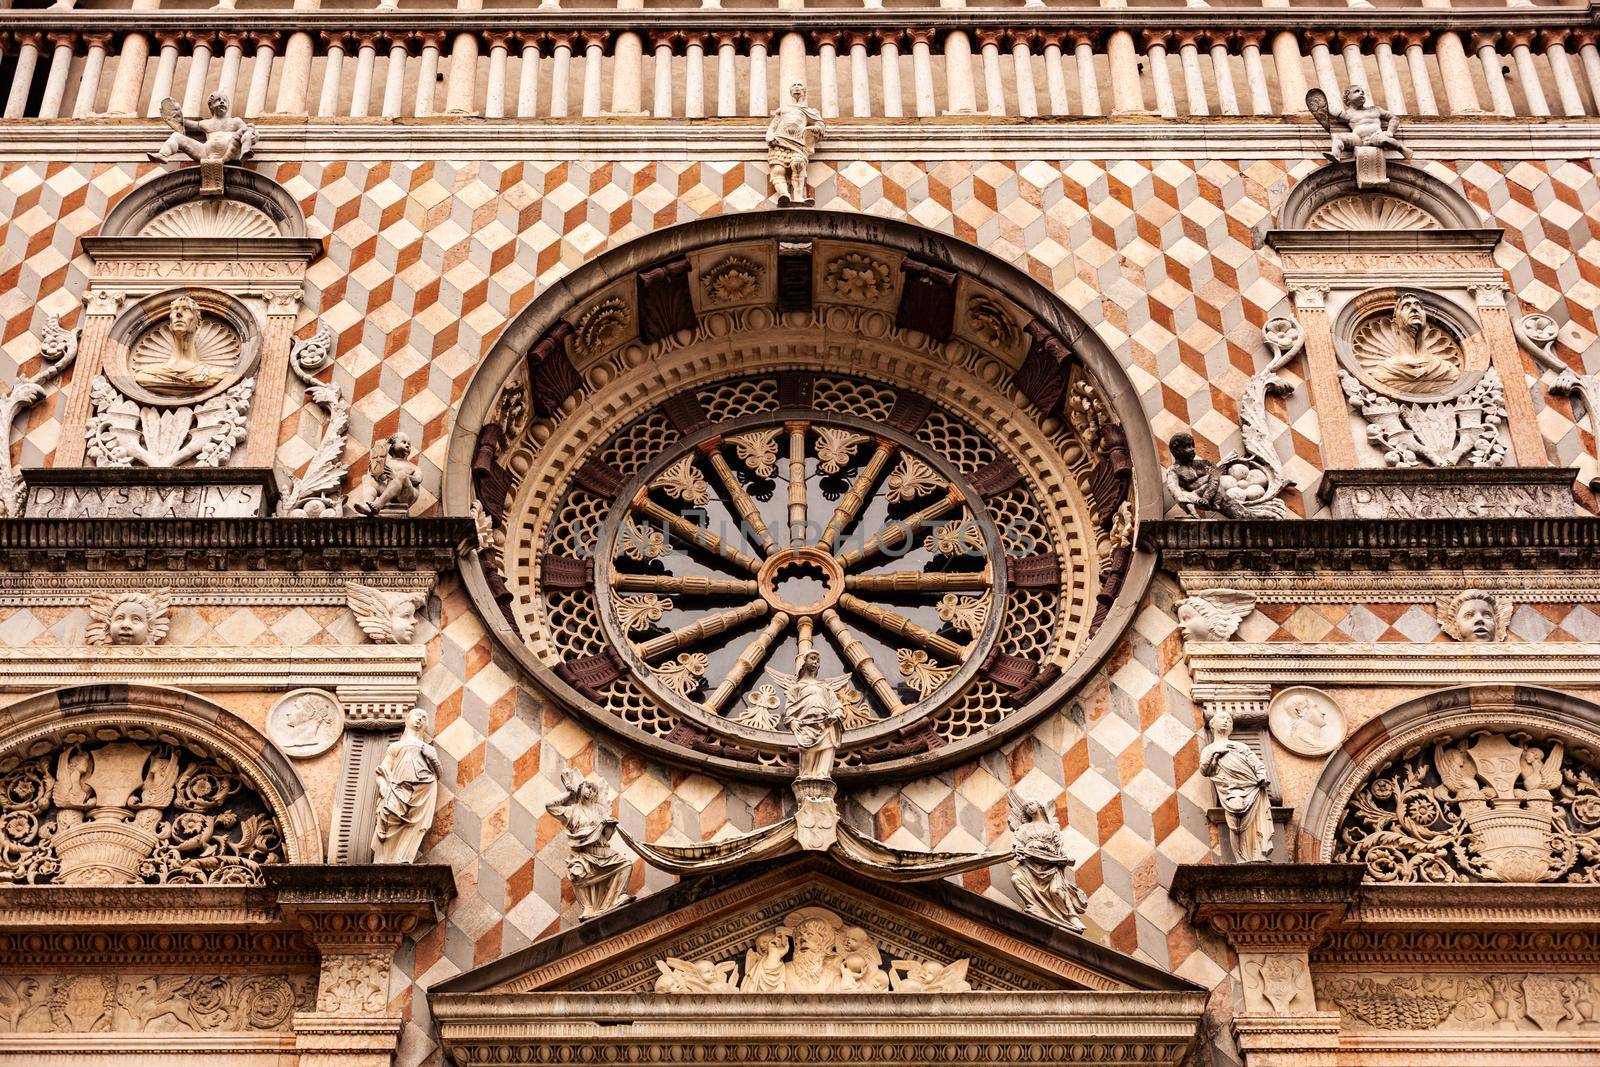 The rose window of the Cappella Colleoni (was built with marble elements between 1472 and 1476) of the Basilica di Santa Maria Maggiore. It major town church and was founded in 1137. Bergamo, Italy